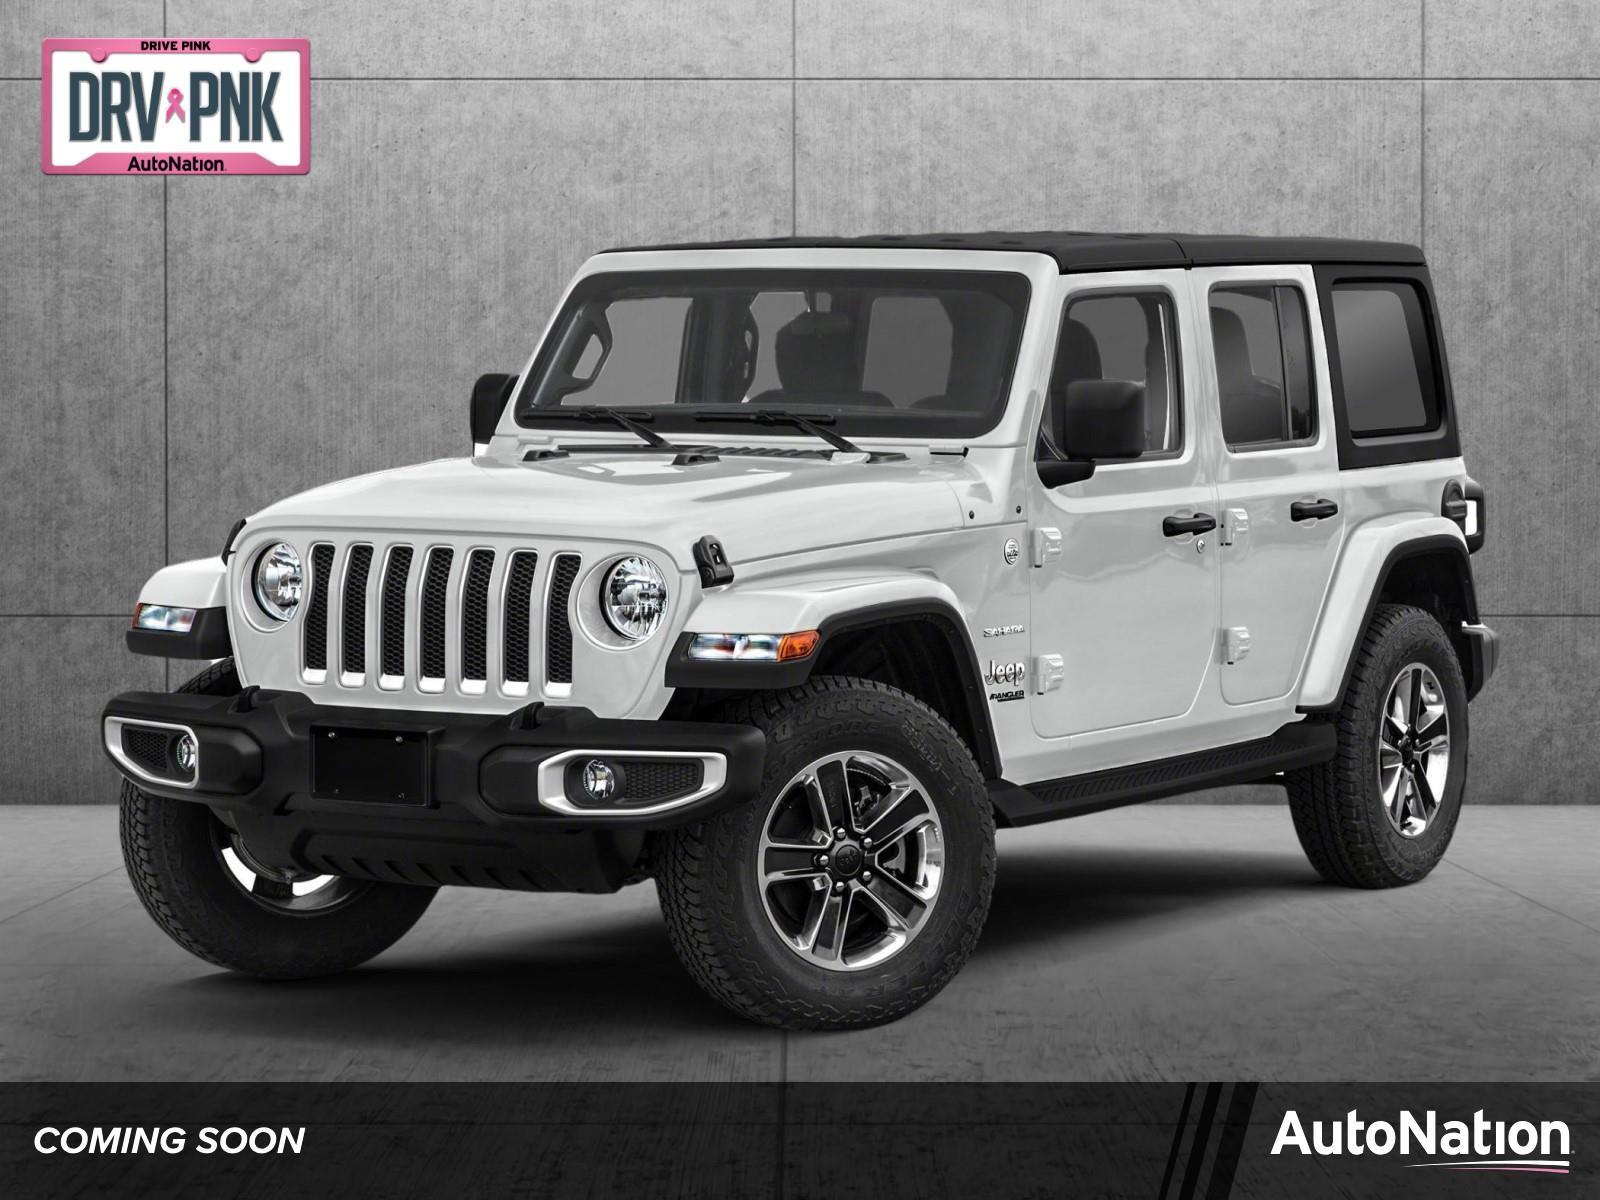 NEW 2023 Jeep Wrangler for sale in Fort Worth, TX 76180 - AutoNation